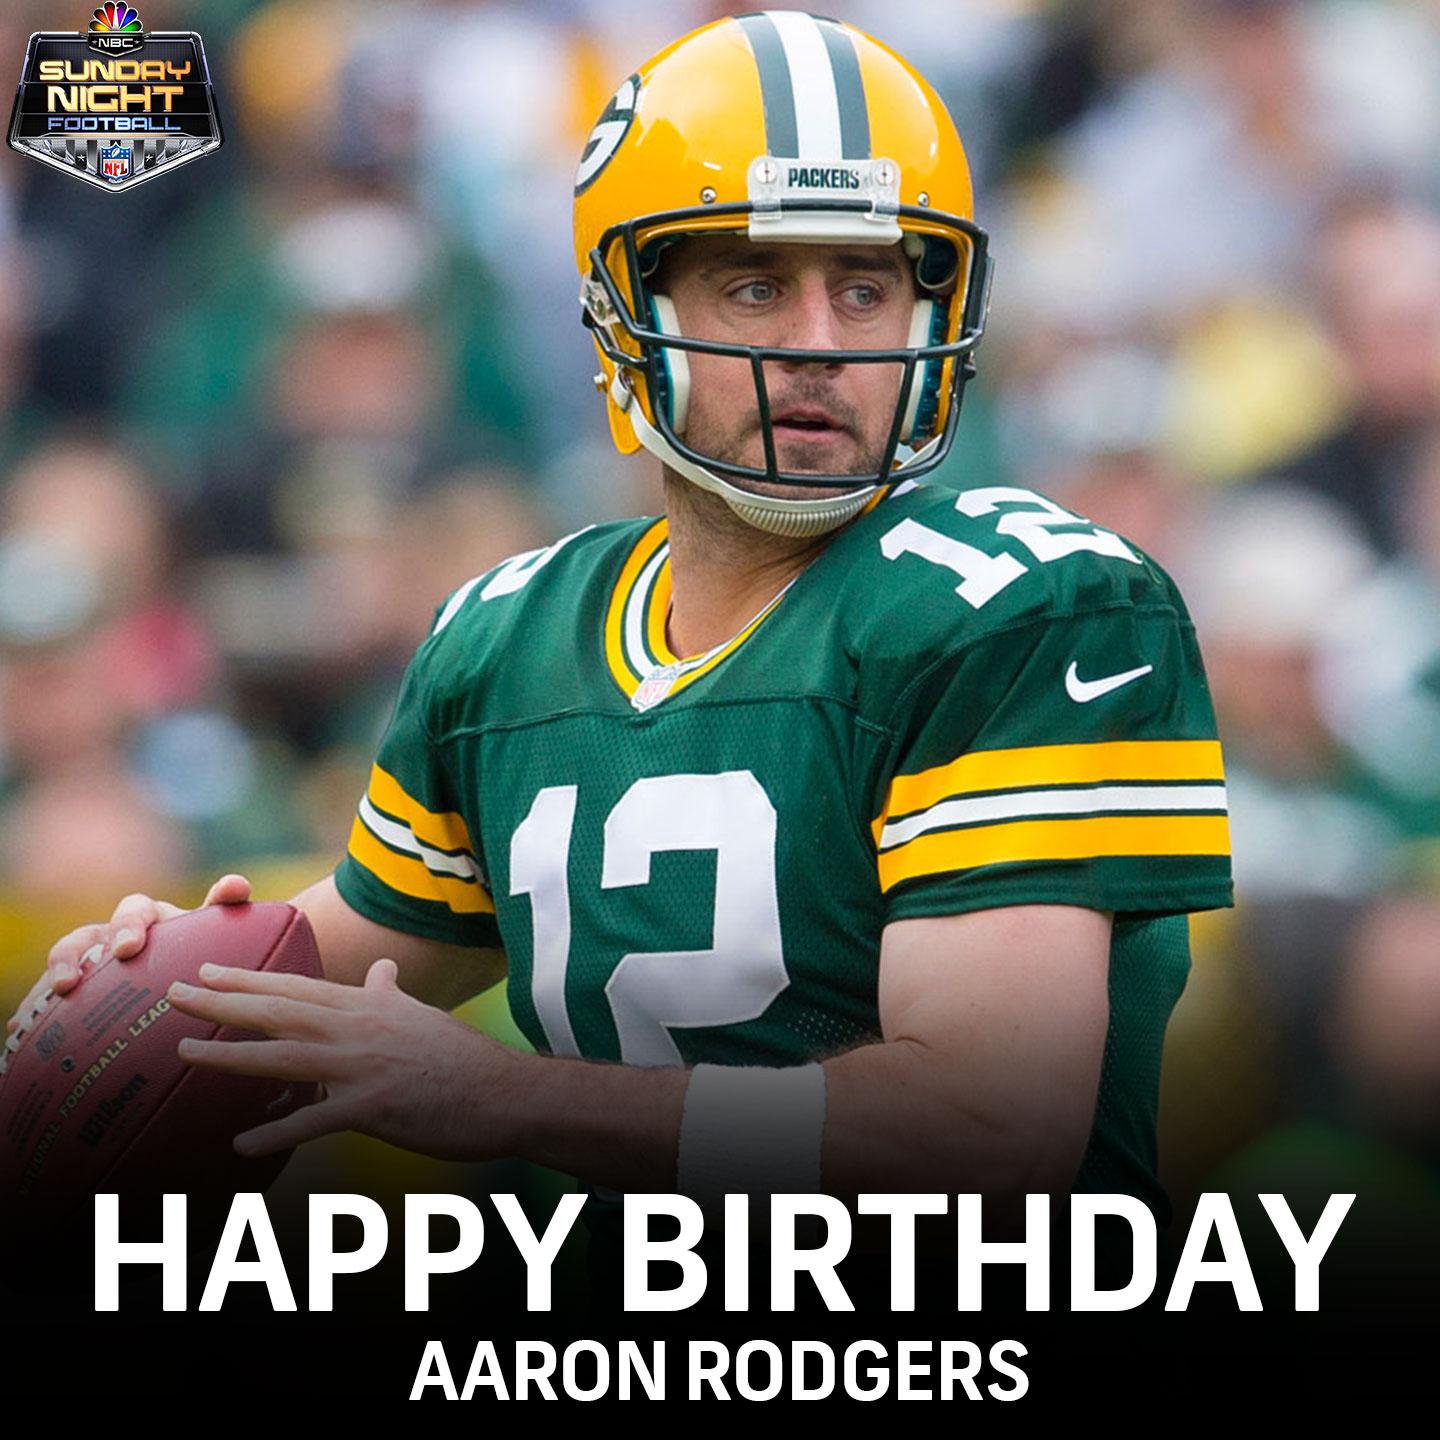 The only one, Aaron Rodgers The Relaxer!
Happy Birthday from me too!  Happy Birthday 